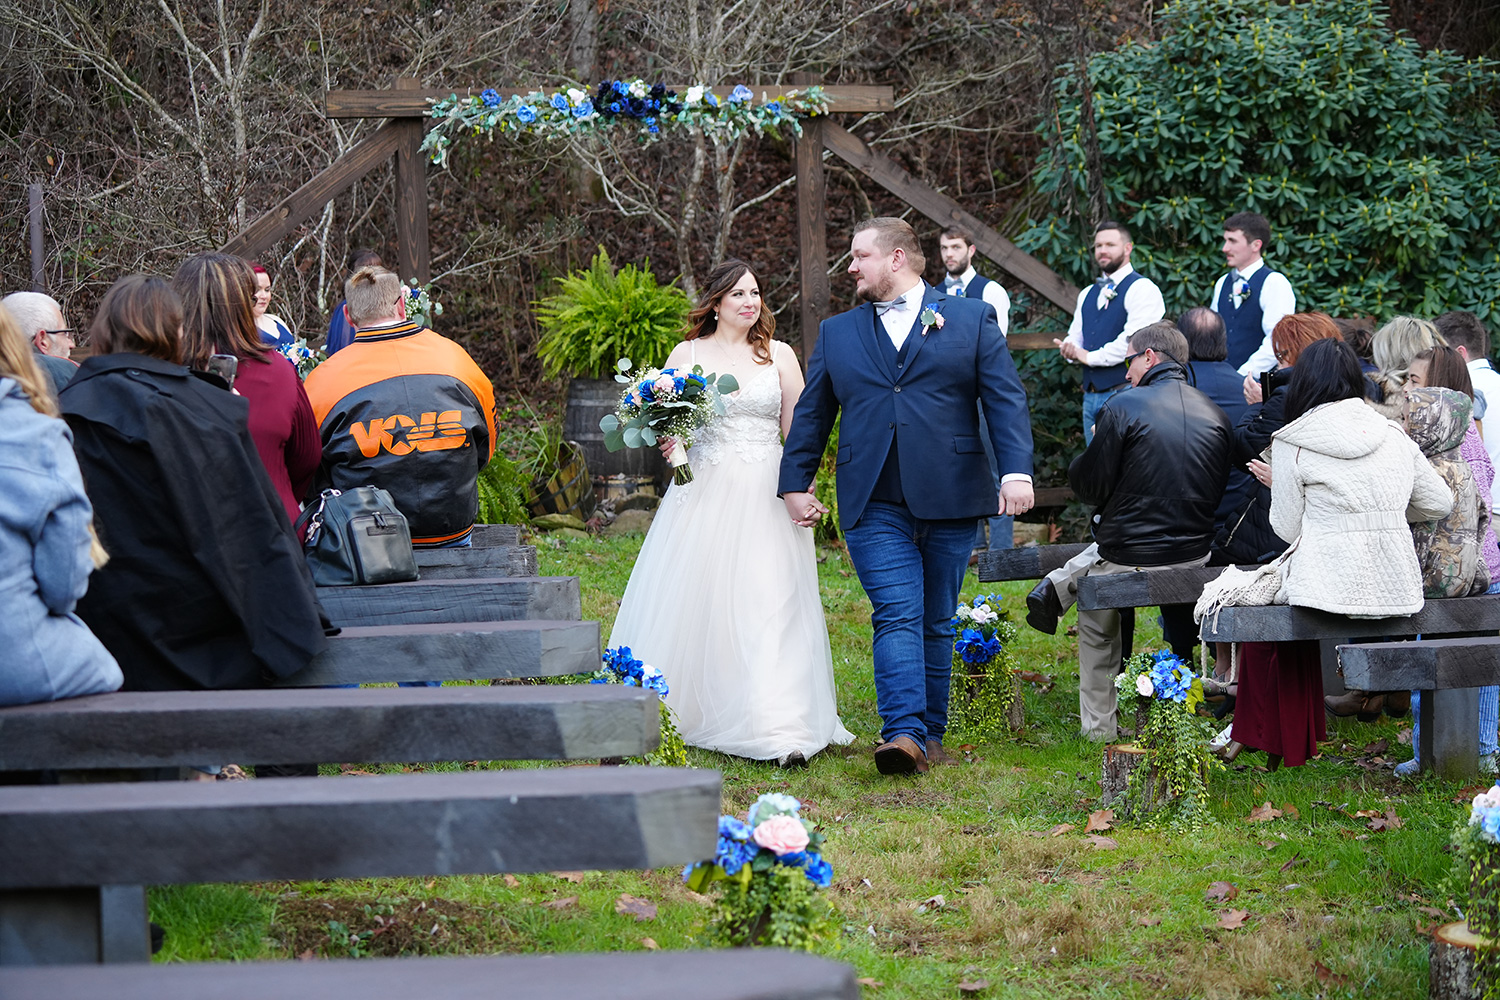 wedding couple walking back down the aisle in a forest by a wooden wedding arbor with blue flowers